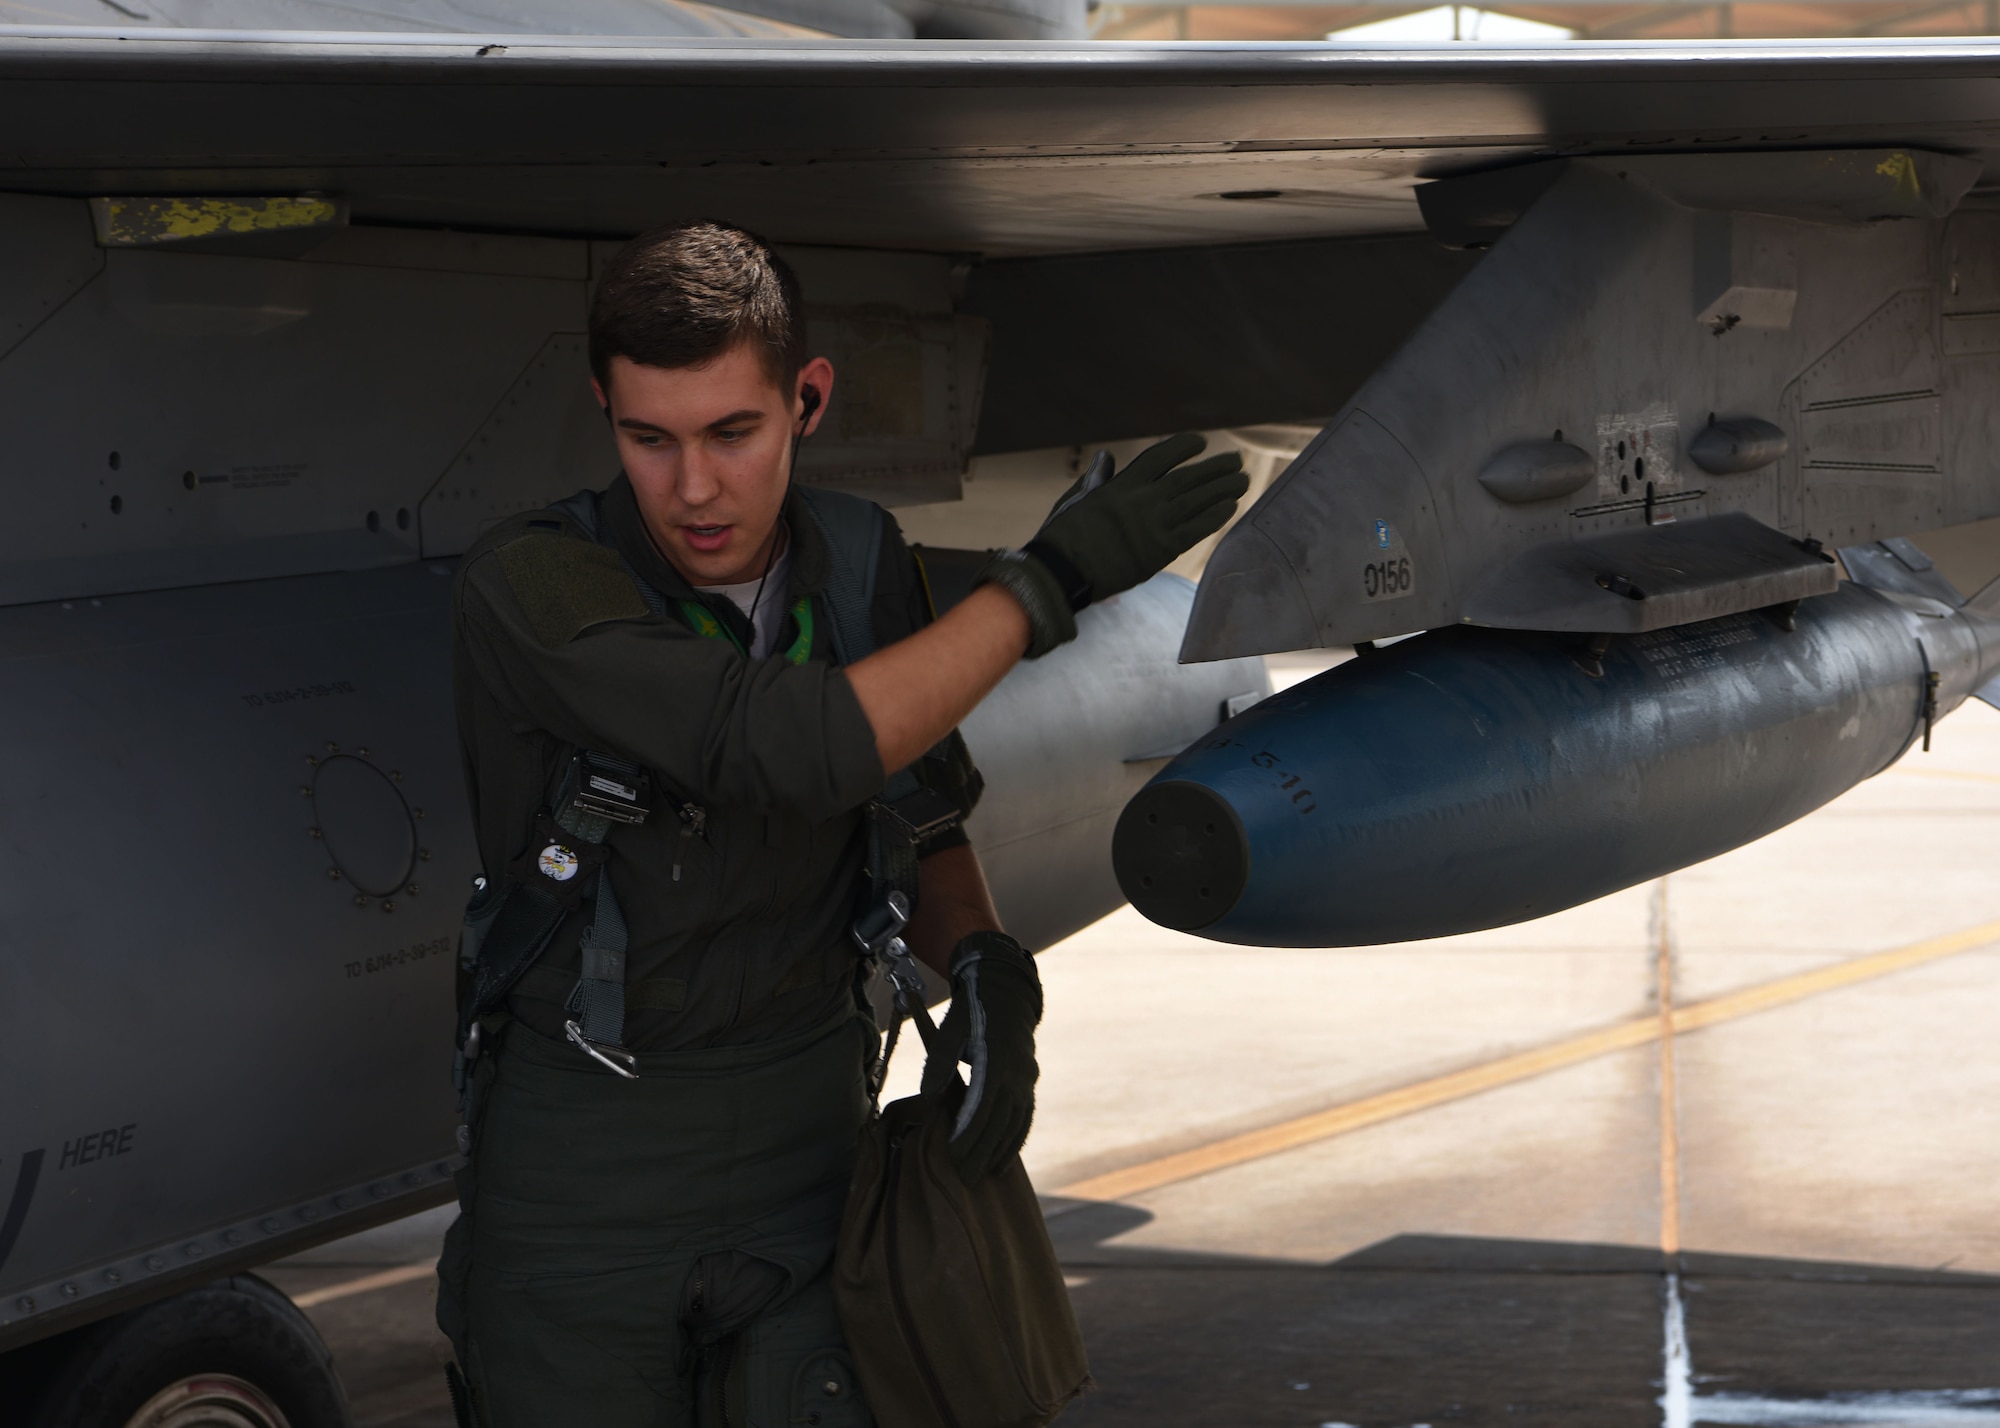 U.S. Air Force 1st Lt. Robert Lowery, a 310th Fighter Squadron F-16 Fighting Falcon student pilot, completes a final check to ensure the safety of the aircraft, Aug. 8, 2018 at Luke Air Force Base, Ariz.